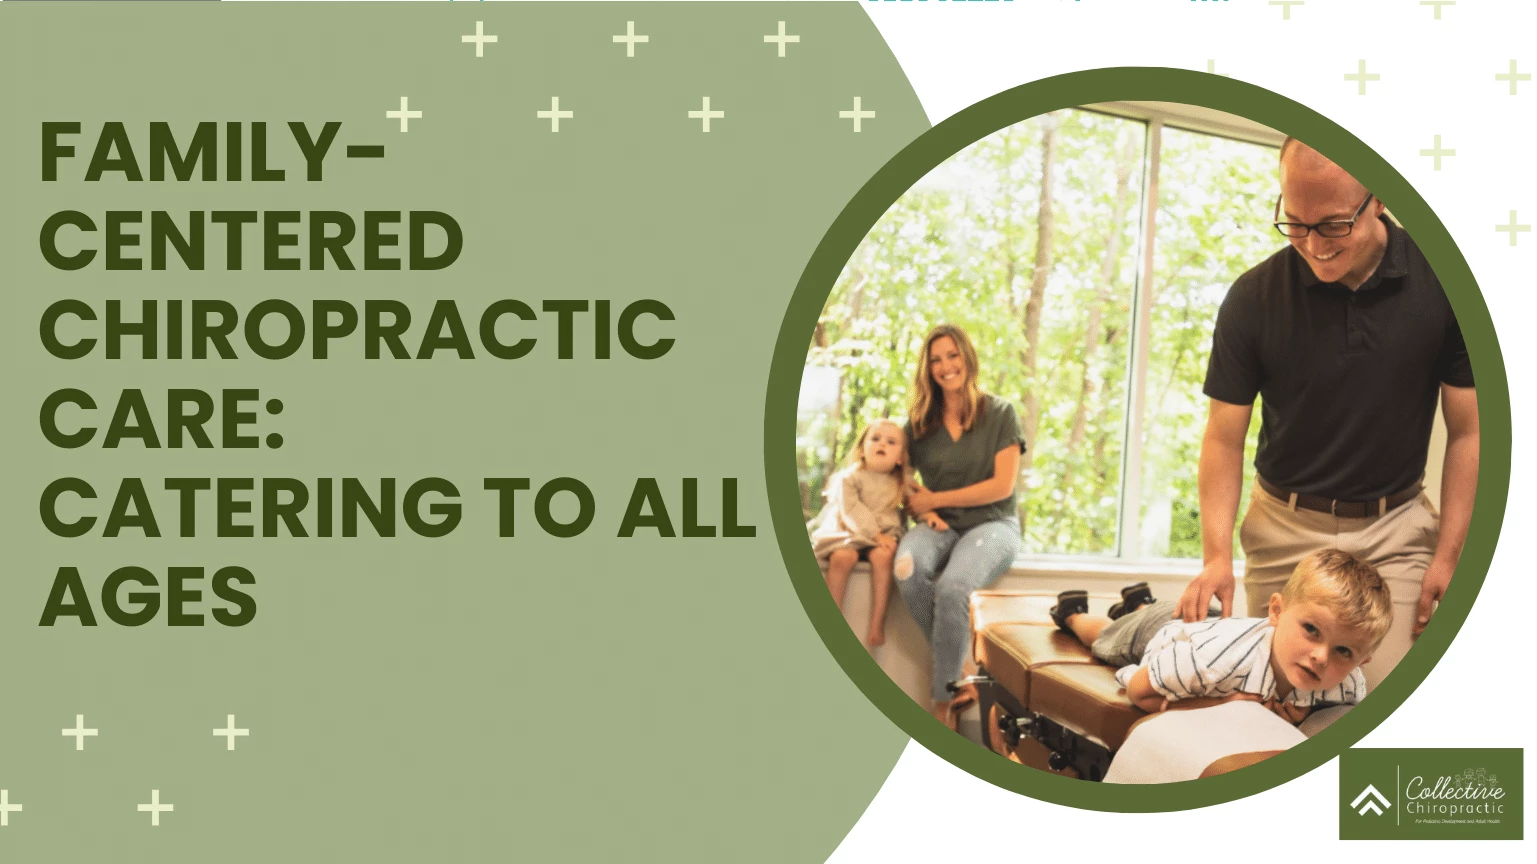 Family-Centered Chiropractic Care Catering to All Ages